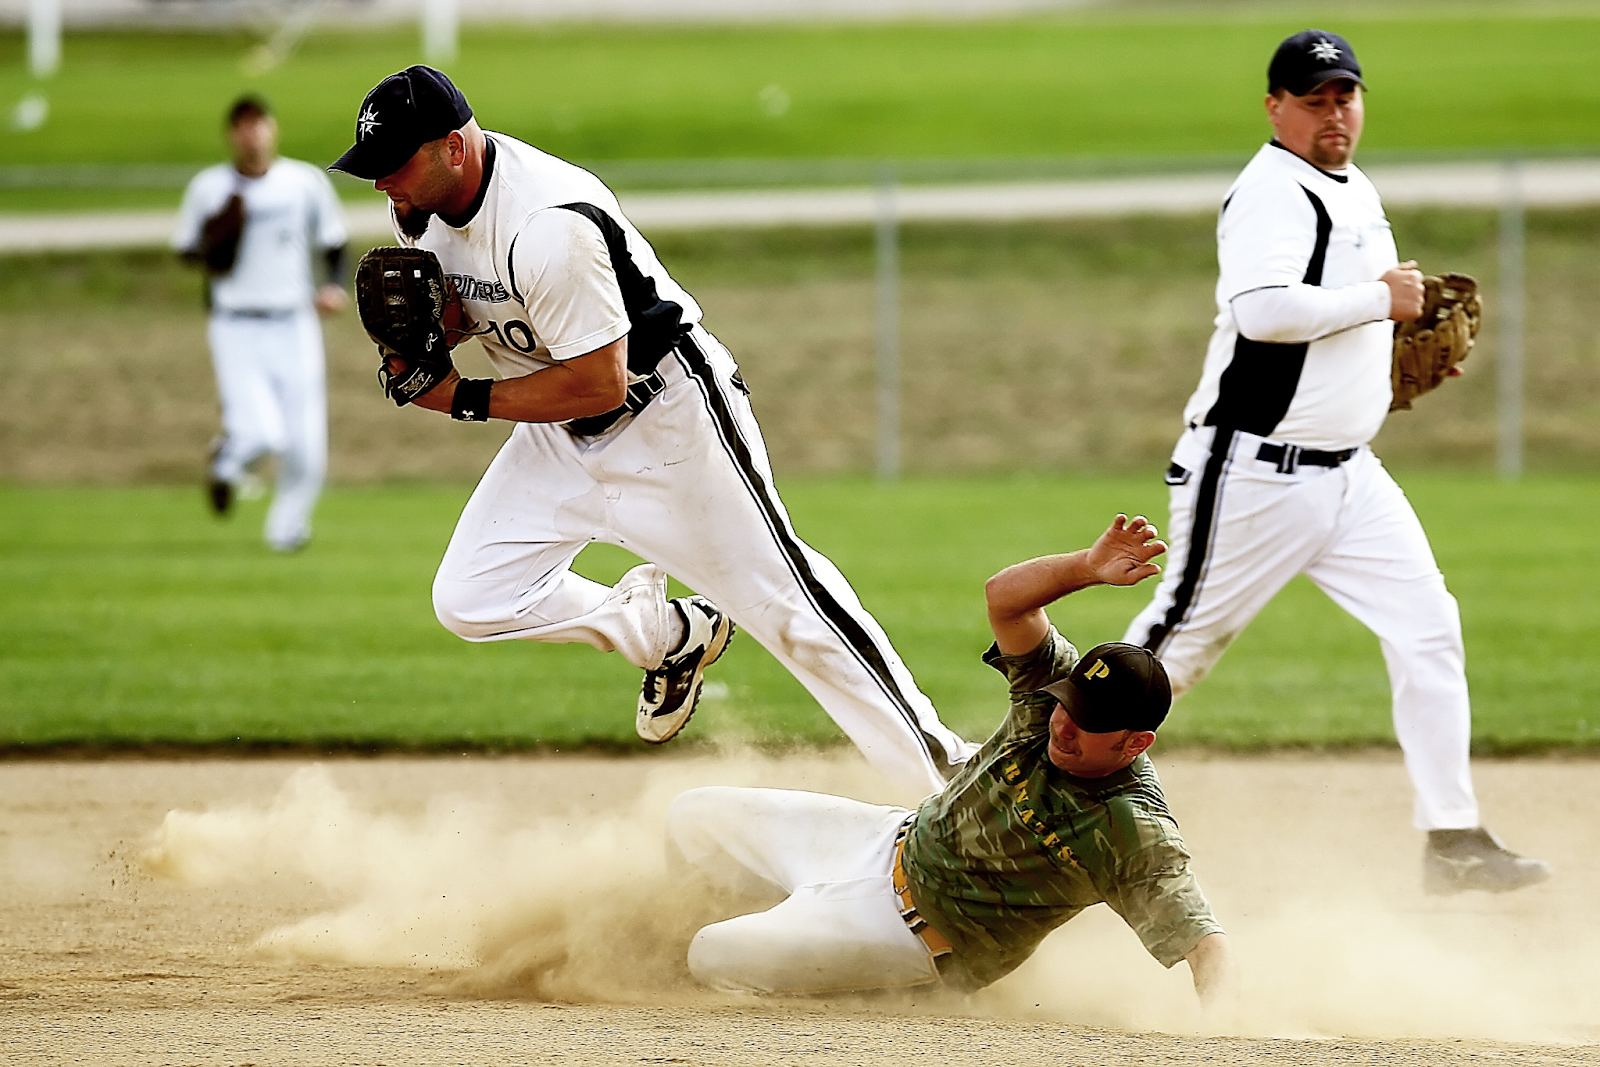 baseball players in action 